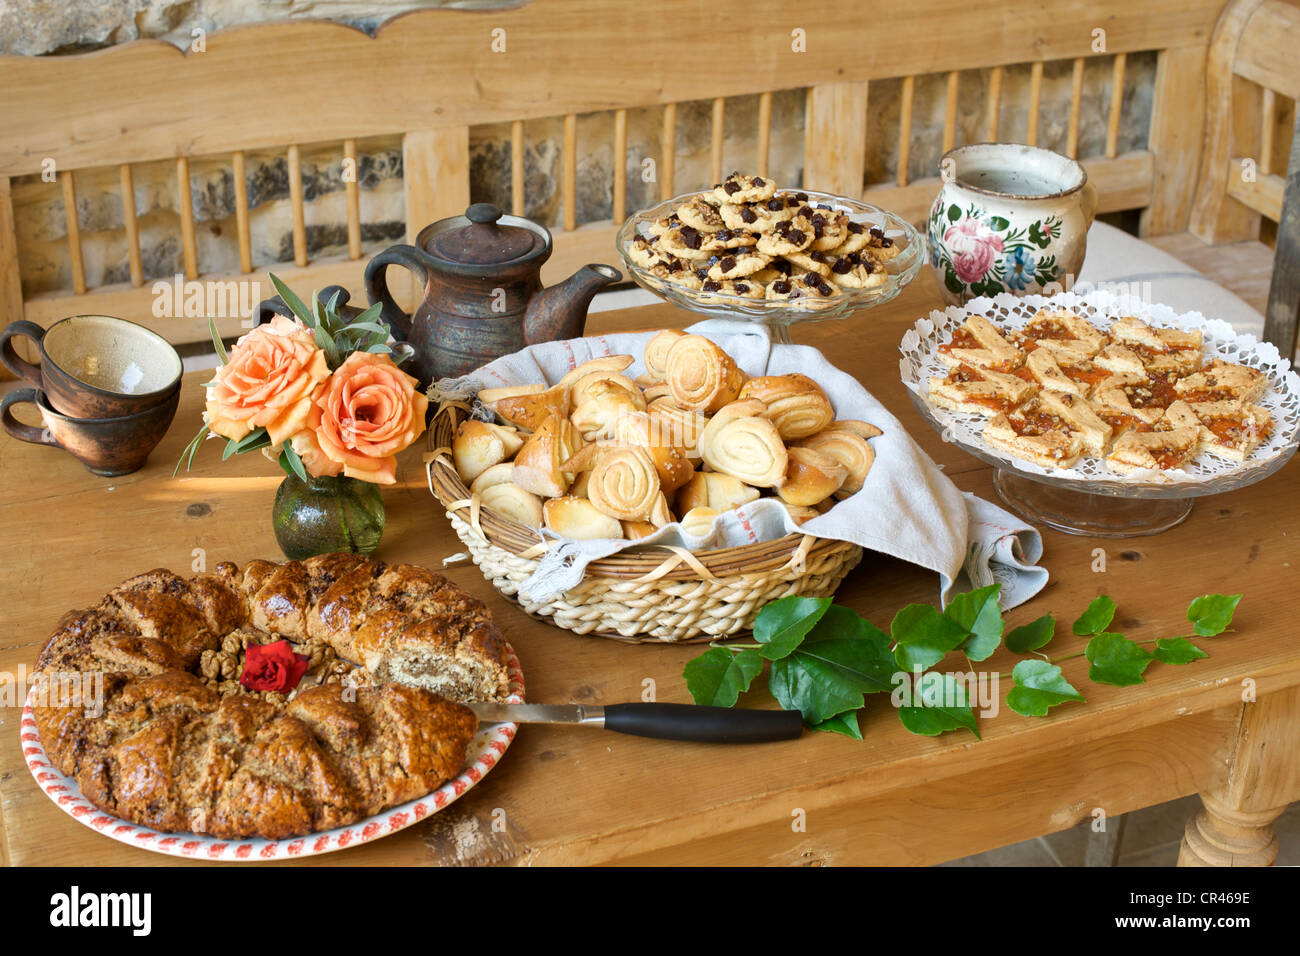 Walnut tart and pastries on a table in Hungary. Stock Photo